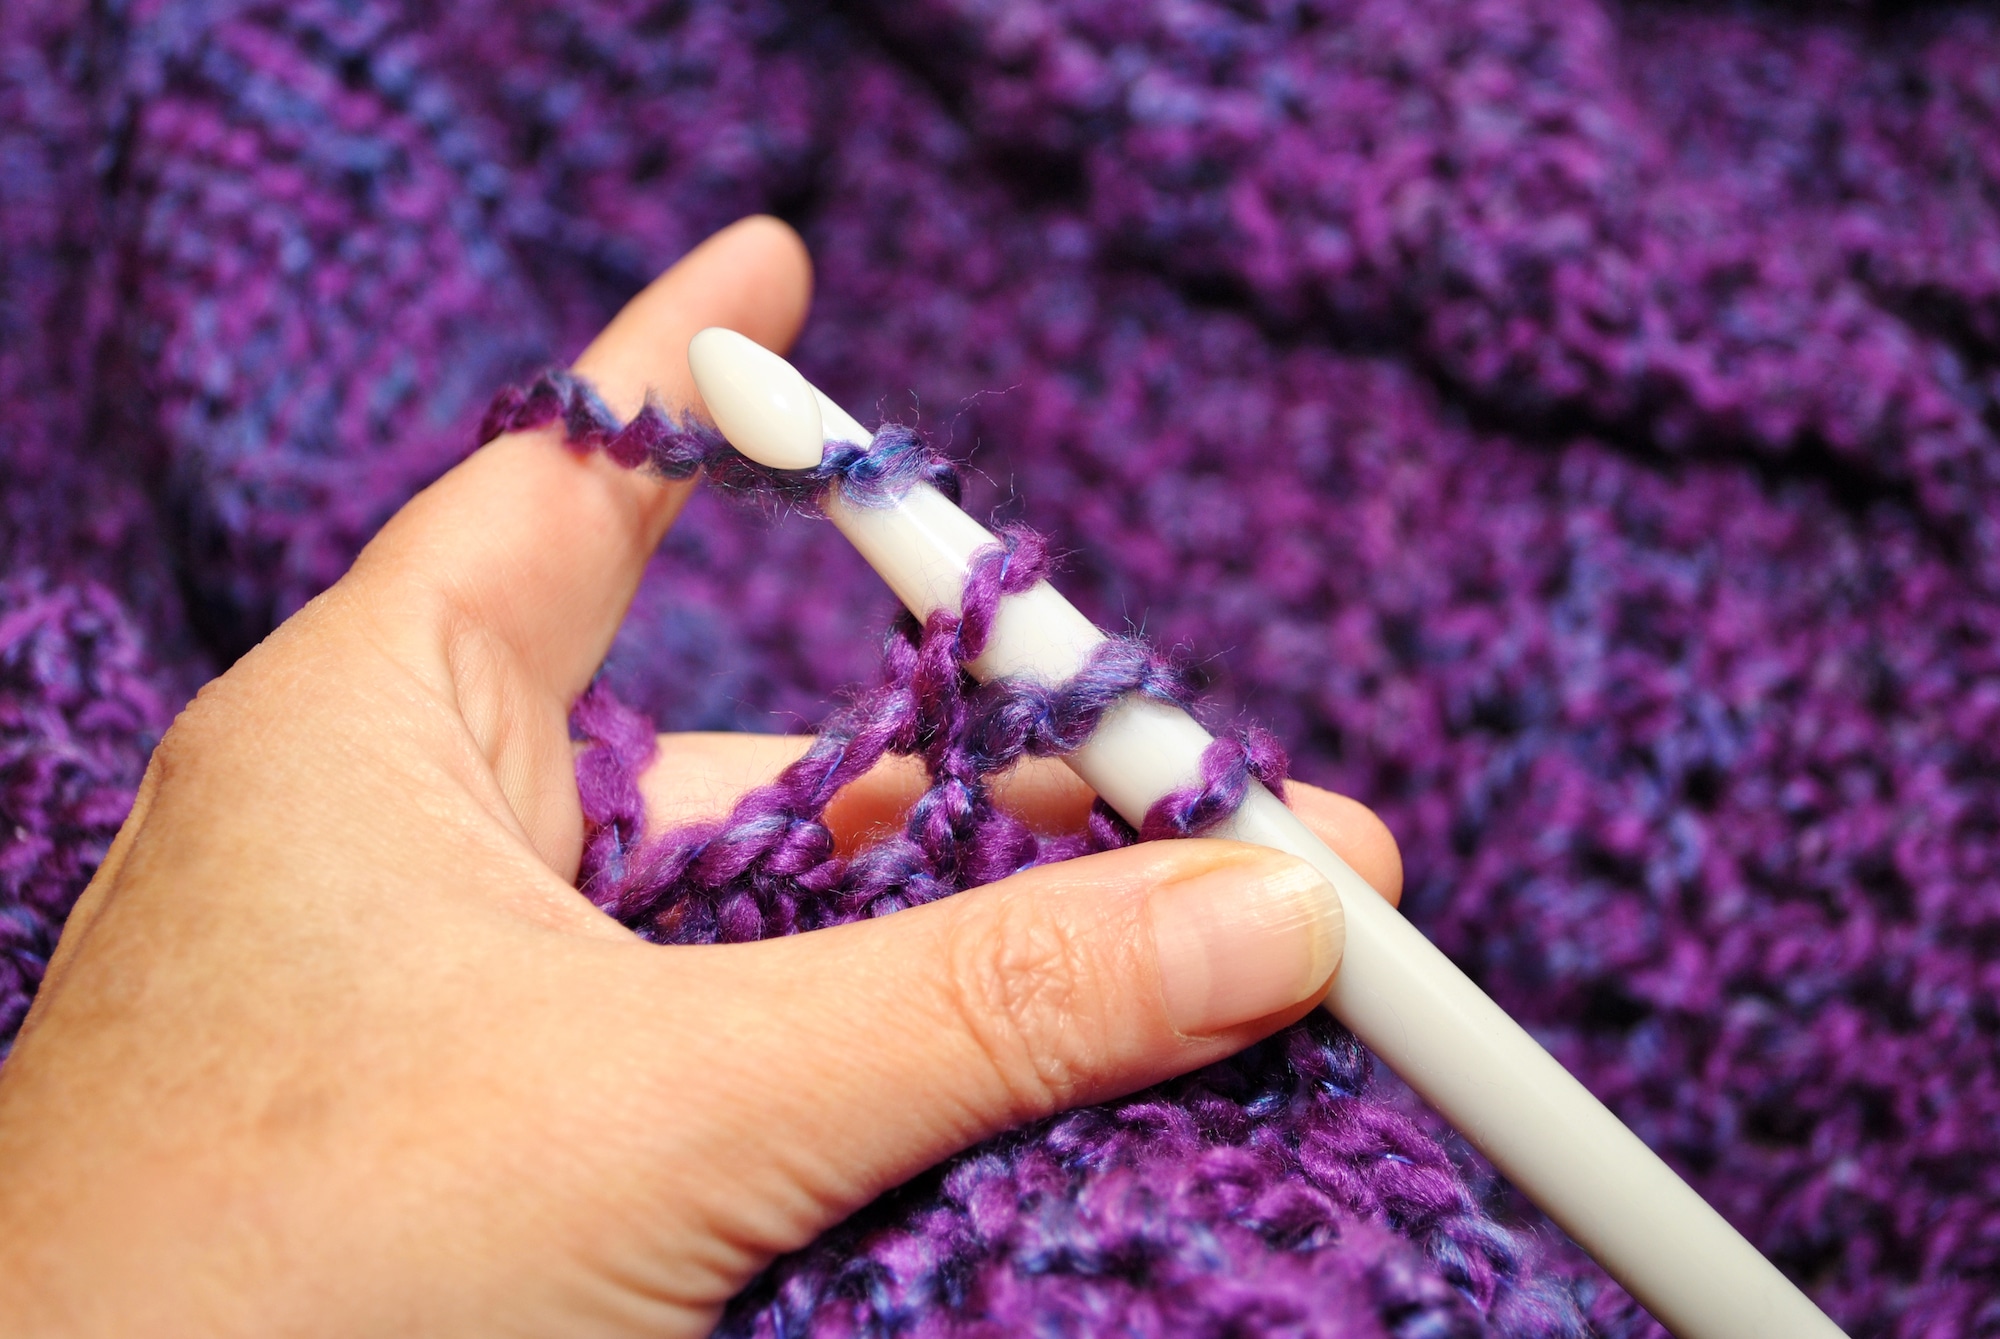 How To Learn To Crochet: A Beginner Friendly Guide - Crafts on Air